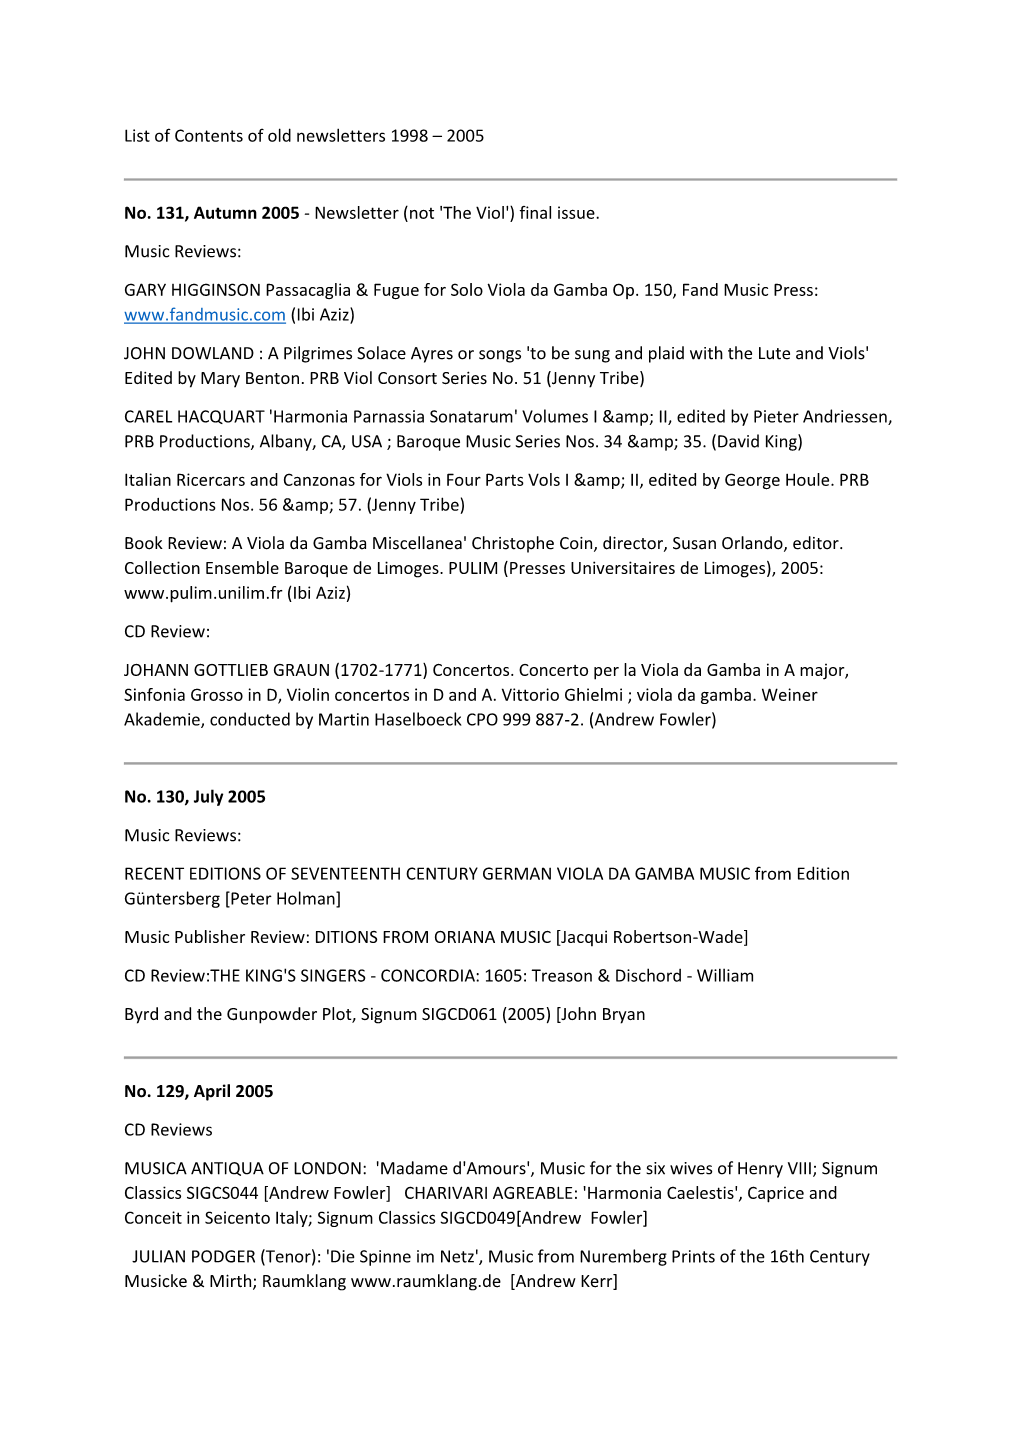 List of Contents of Old Newsletters 1998 – 2005